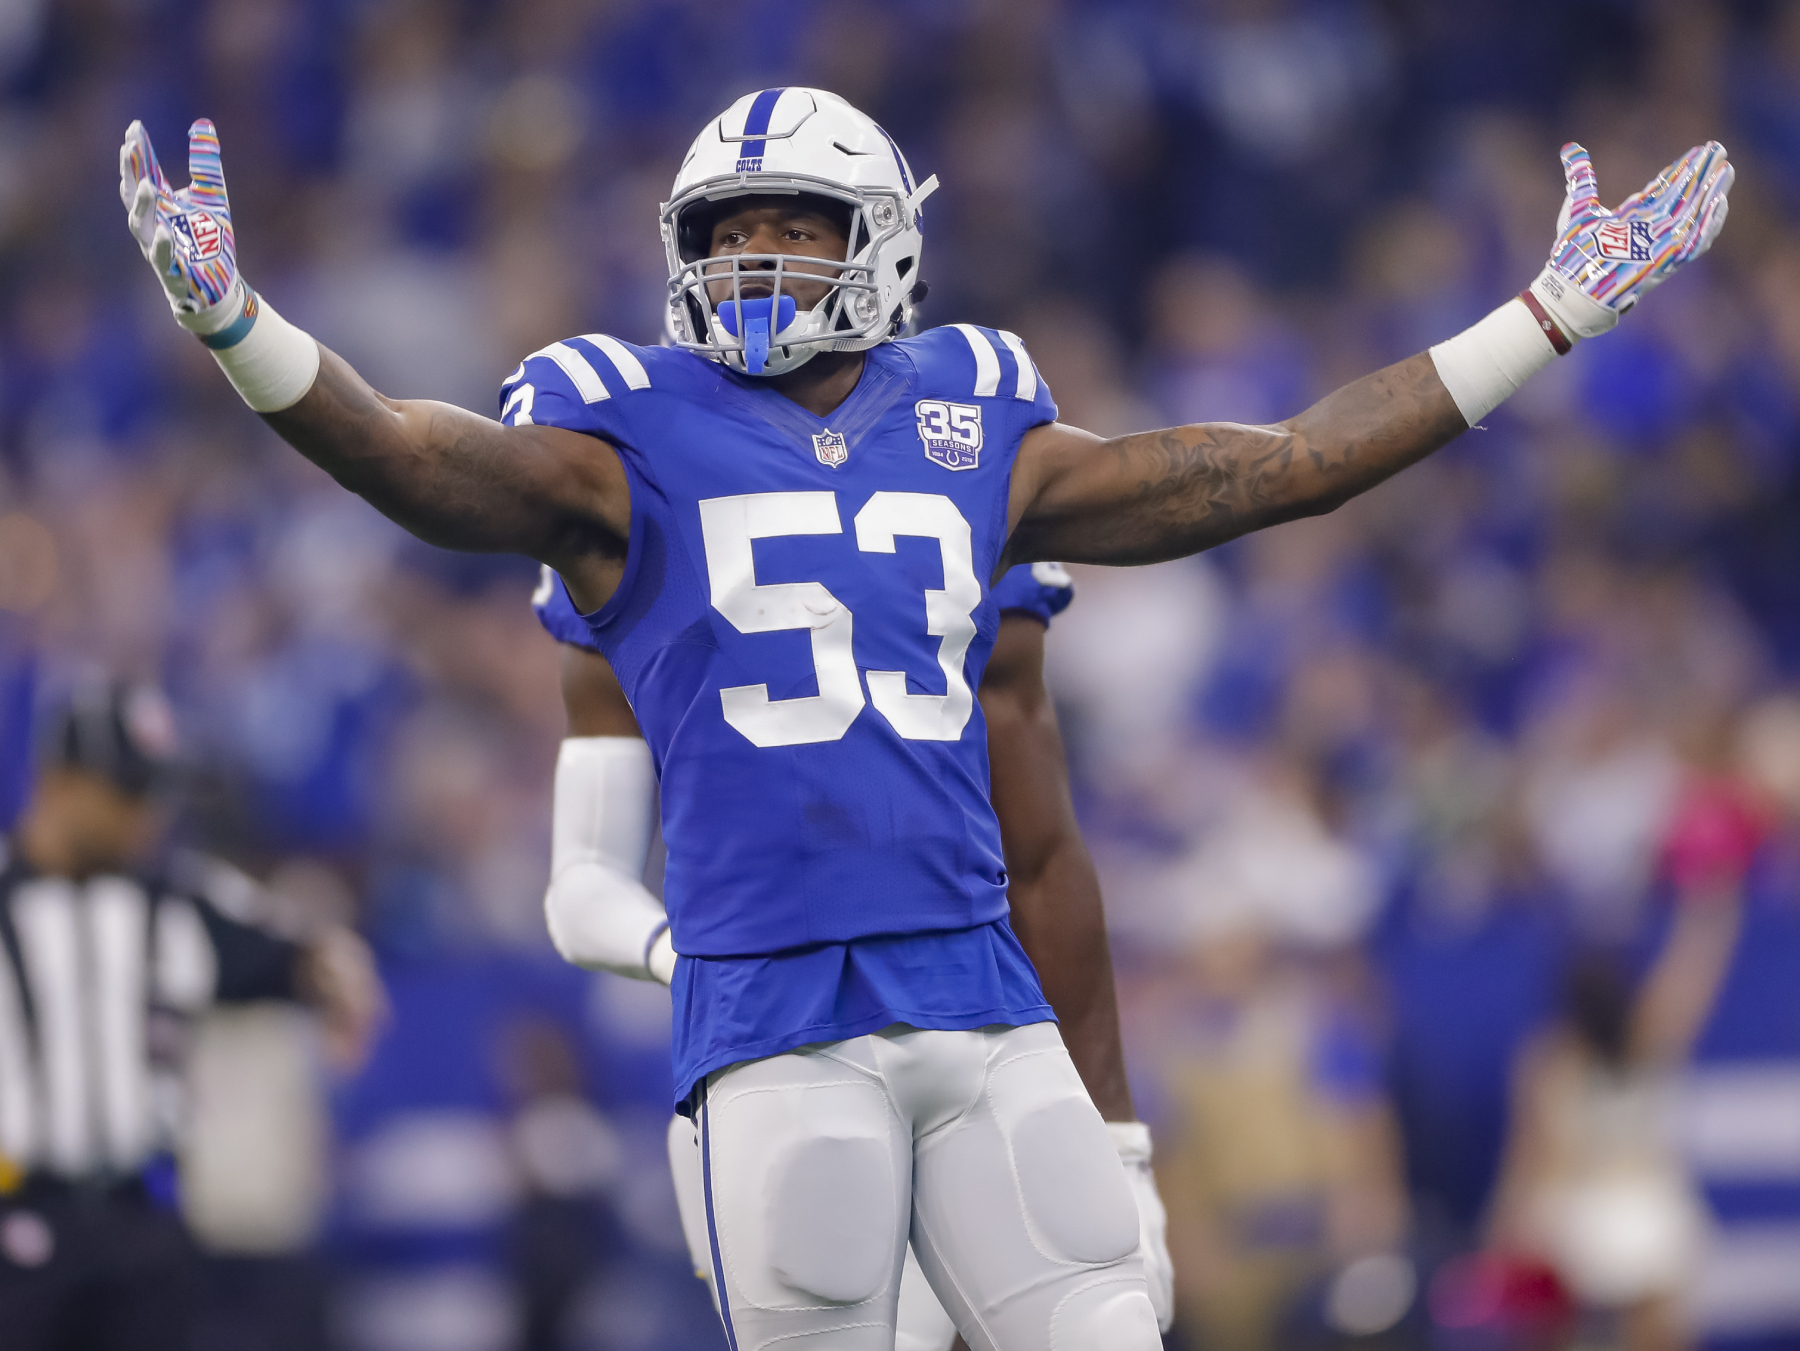 Darius Leonard is one of the best linebackers in the NFL and has dominated for the Colts. He has, however, had to overcome a few tragedies. 